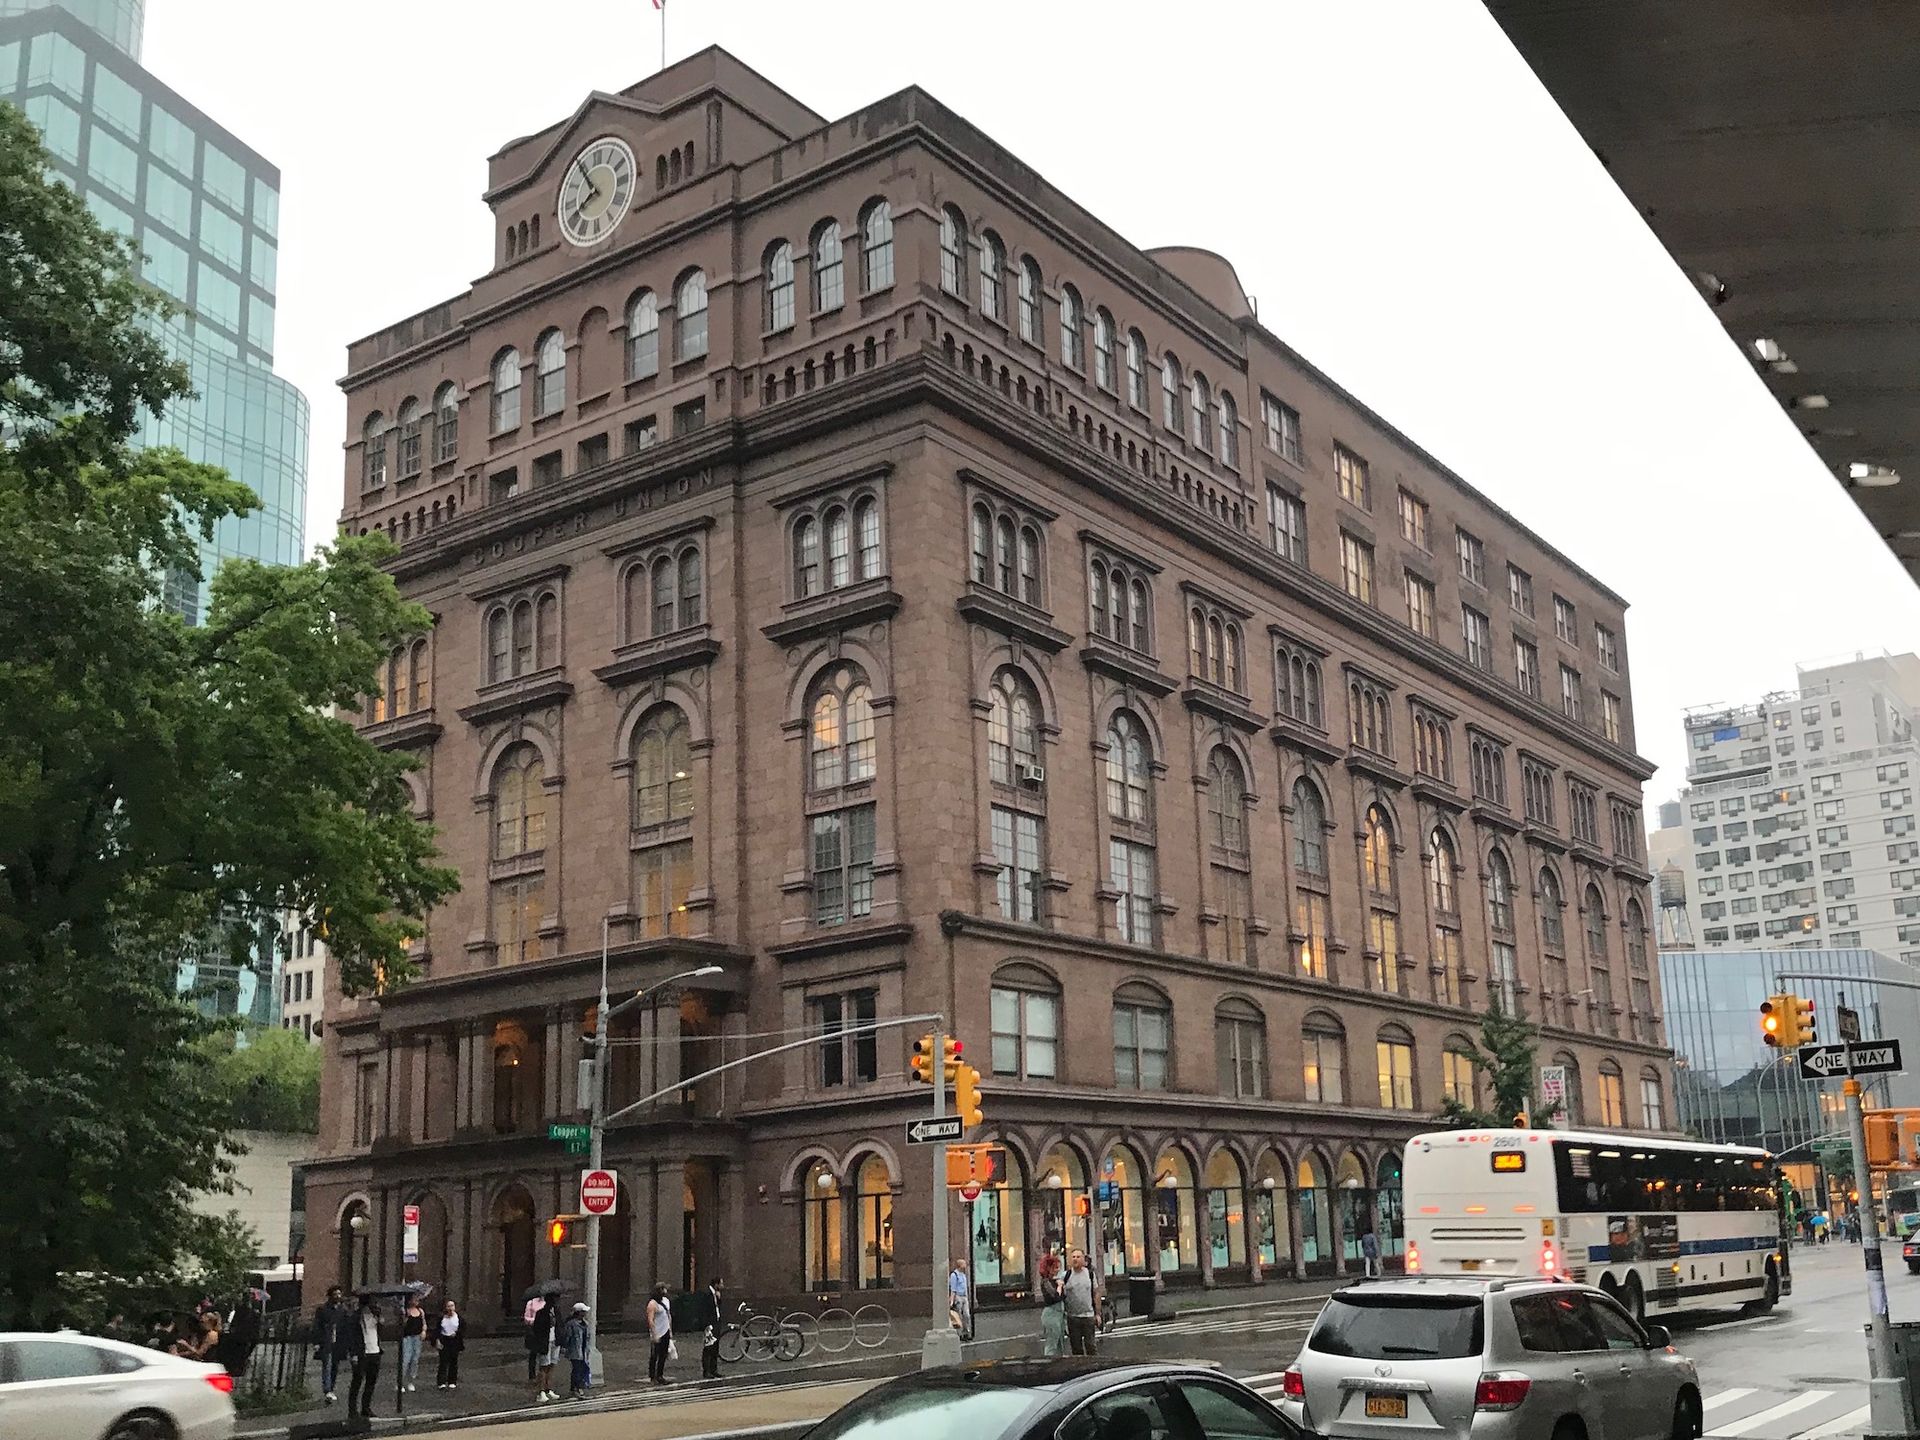 The Cooper Union's Foundation Hall building in Lower Manhattan Photo by Illicitcoffee, via Wikimedia Commons